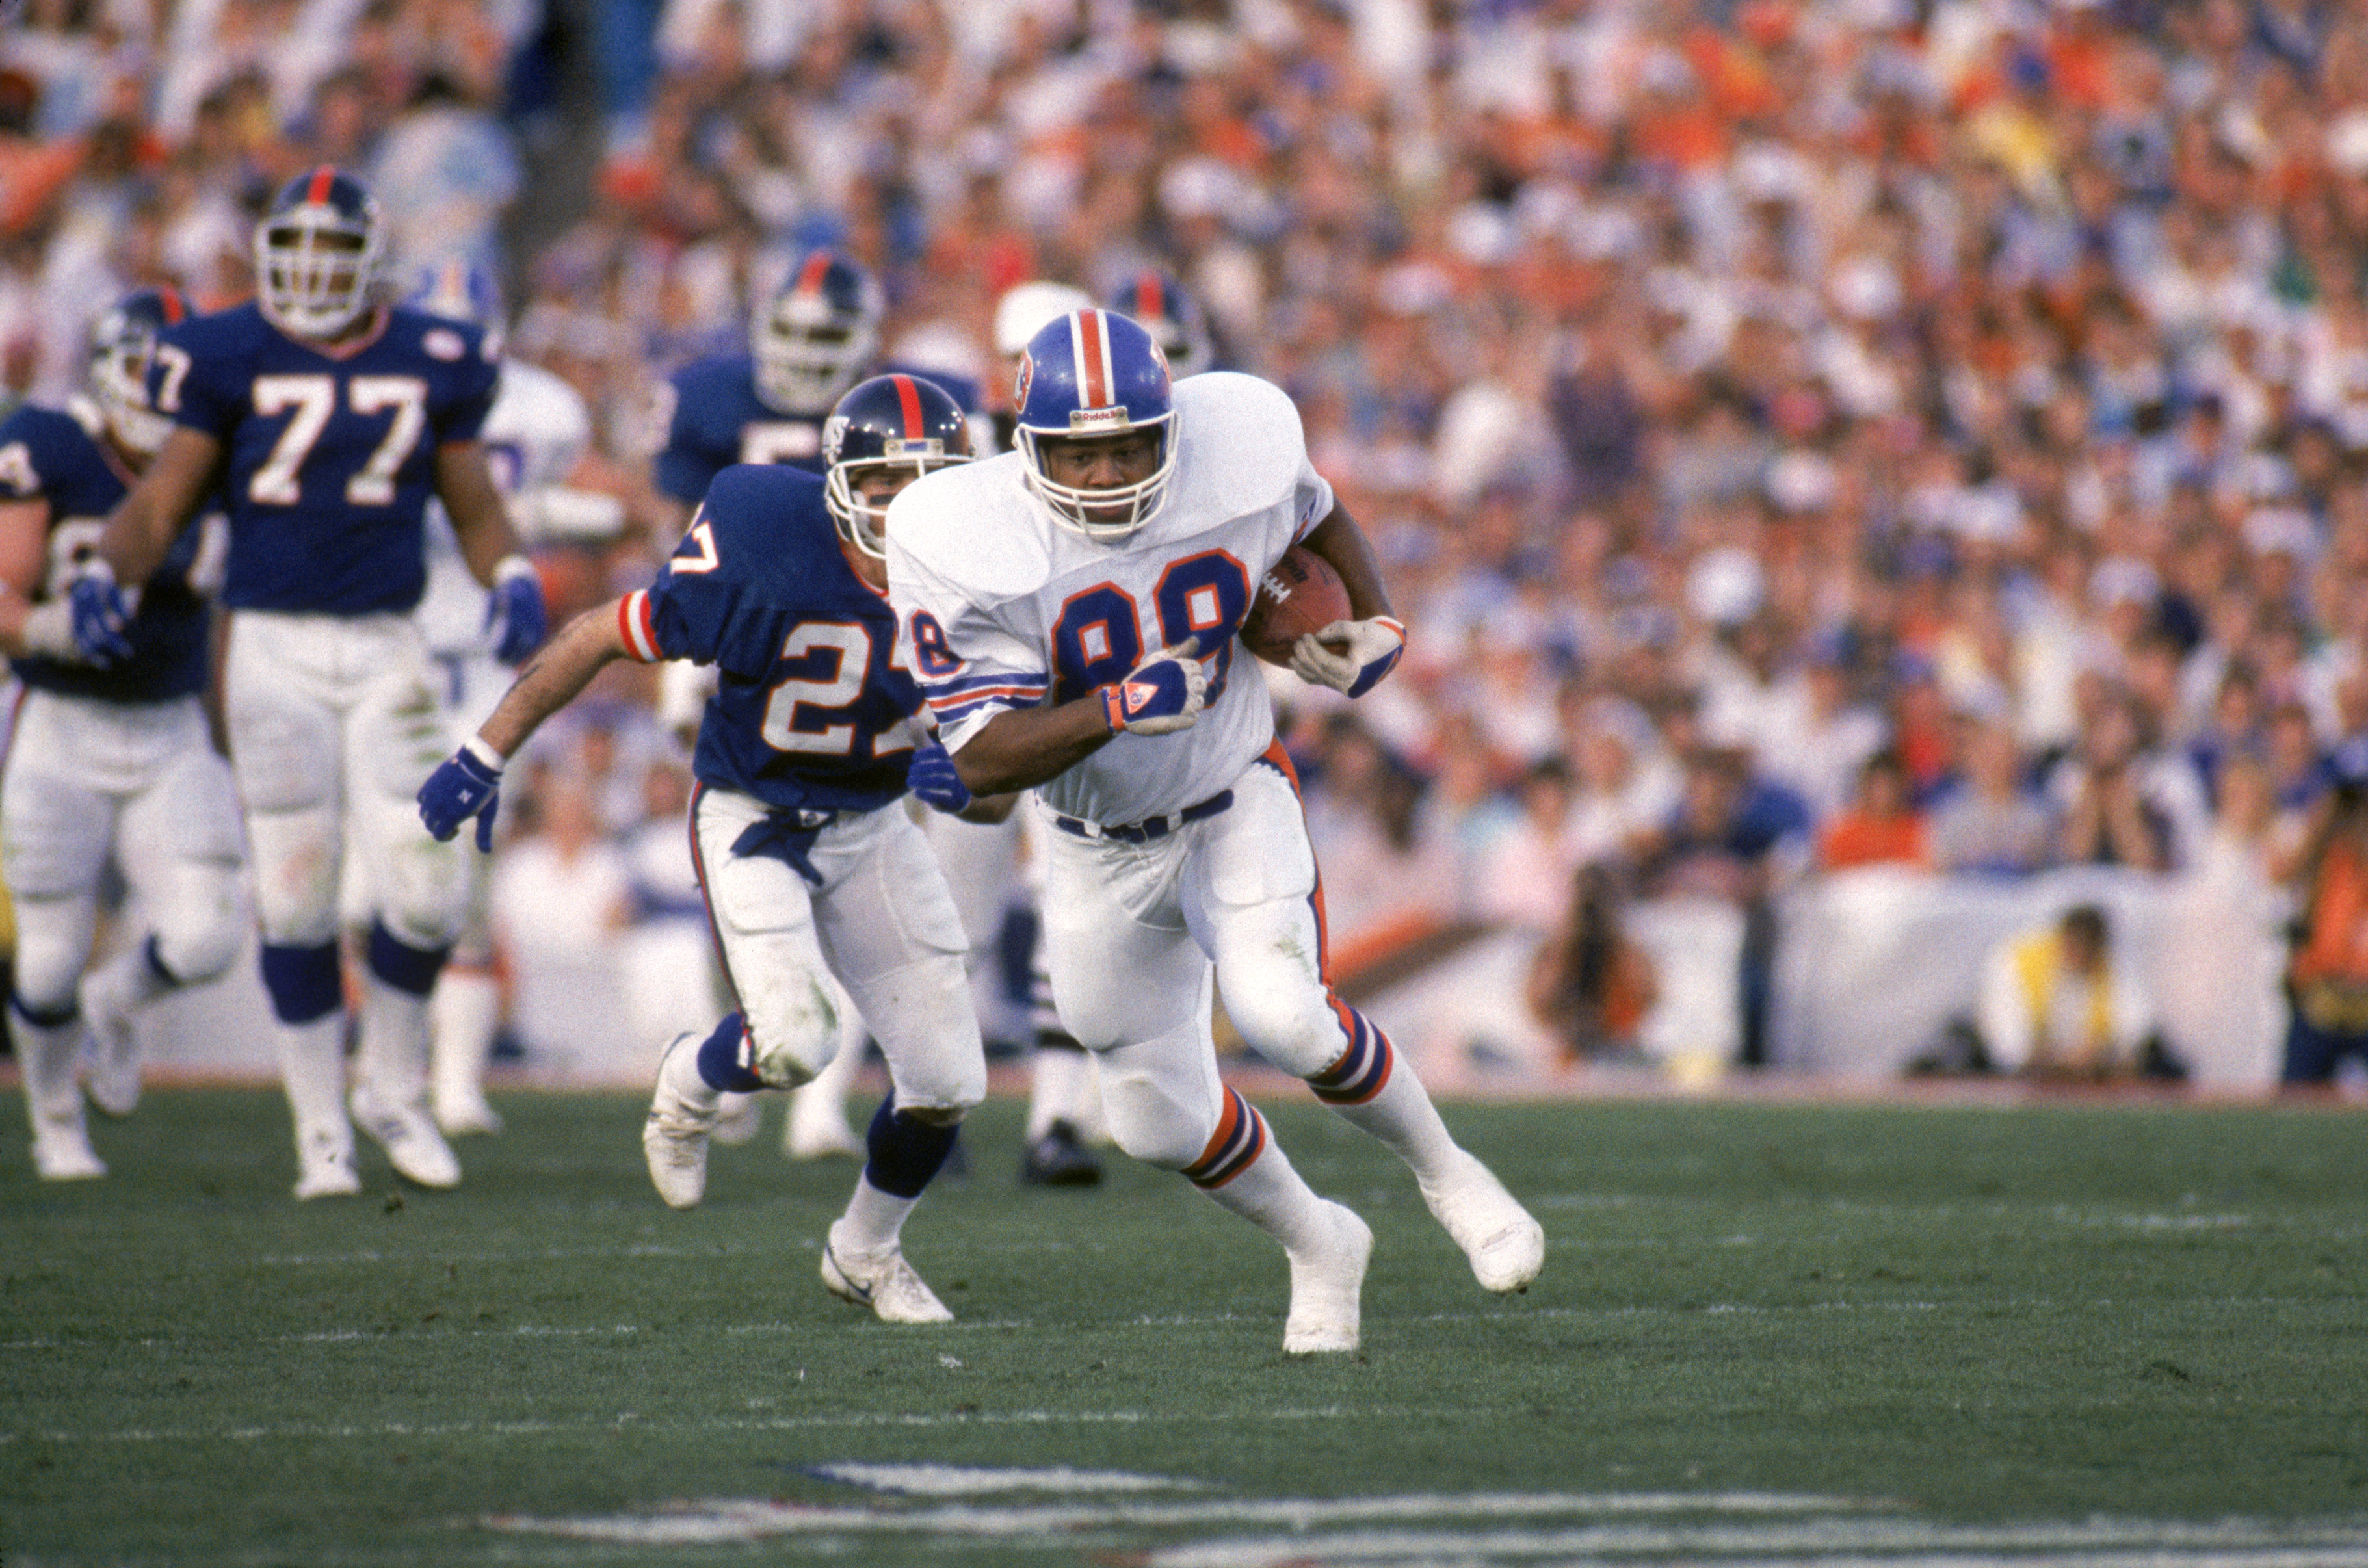 PASADENA, CA - JANUARY 25:  Tight end Clarence Kay #88 of the Denver Broncos hustles for yards past defensive back Herb Welch #27 of the New York Giants during Super Bowl XXI at the Rose Bowl on January 25, 1987 in Pasadena, California.  The Giants won 39